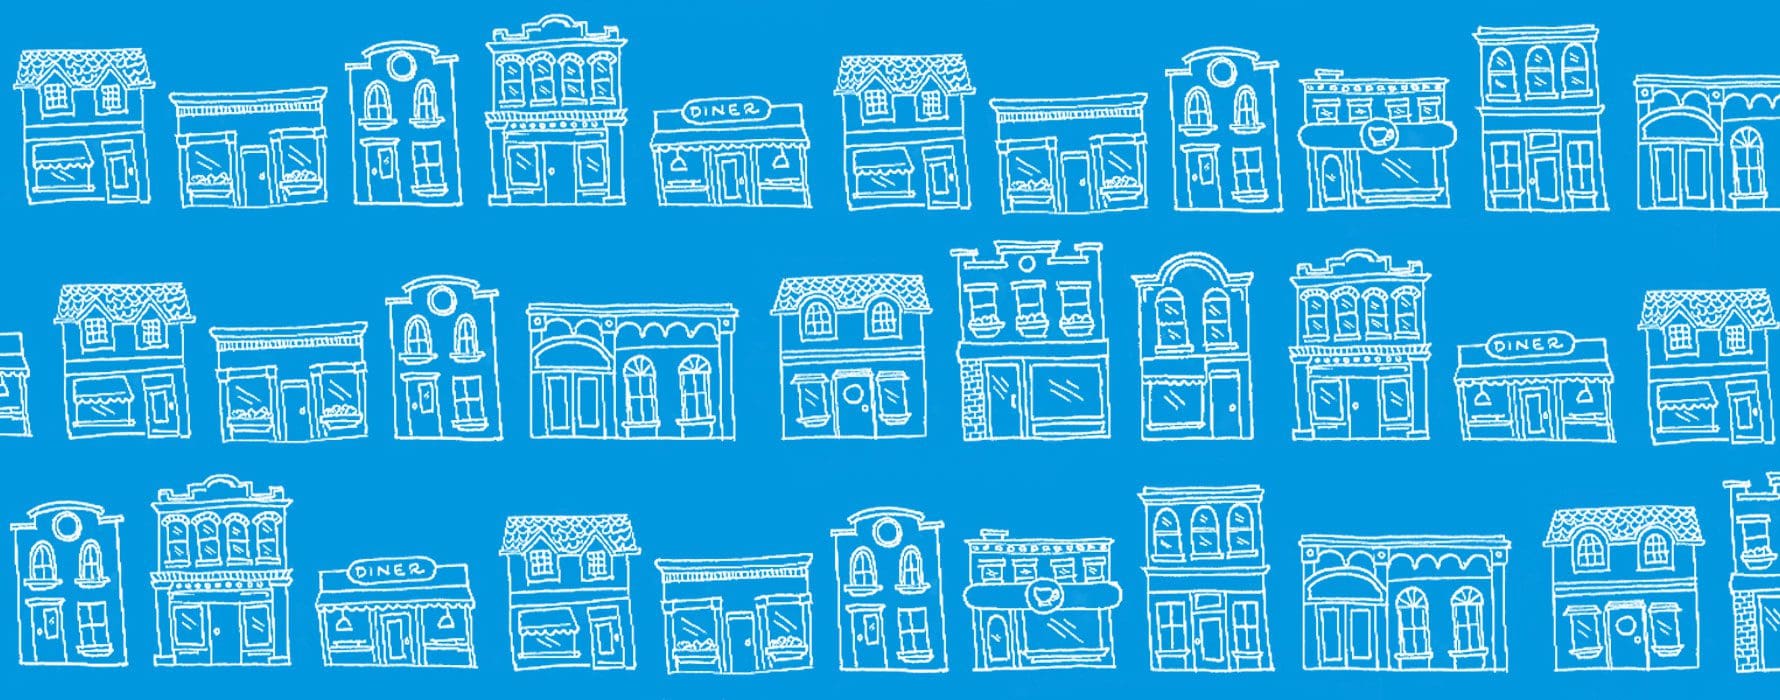 stores in a line graphic